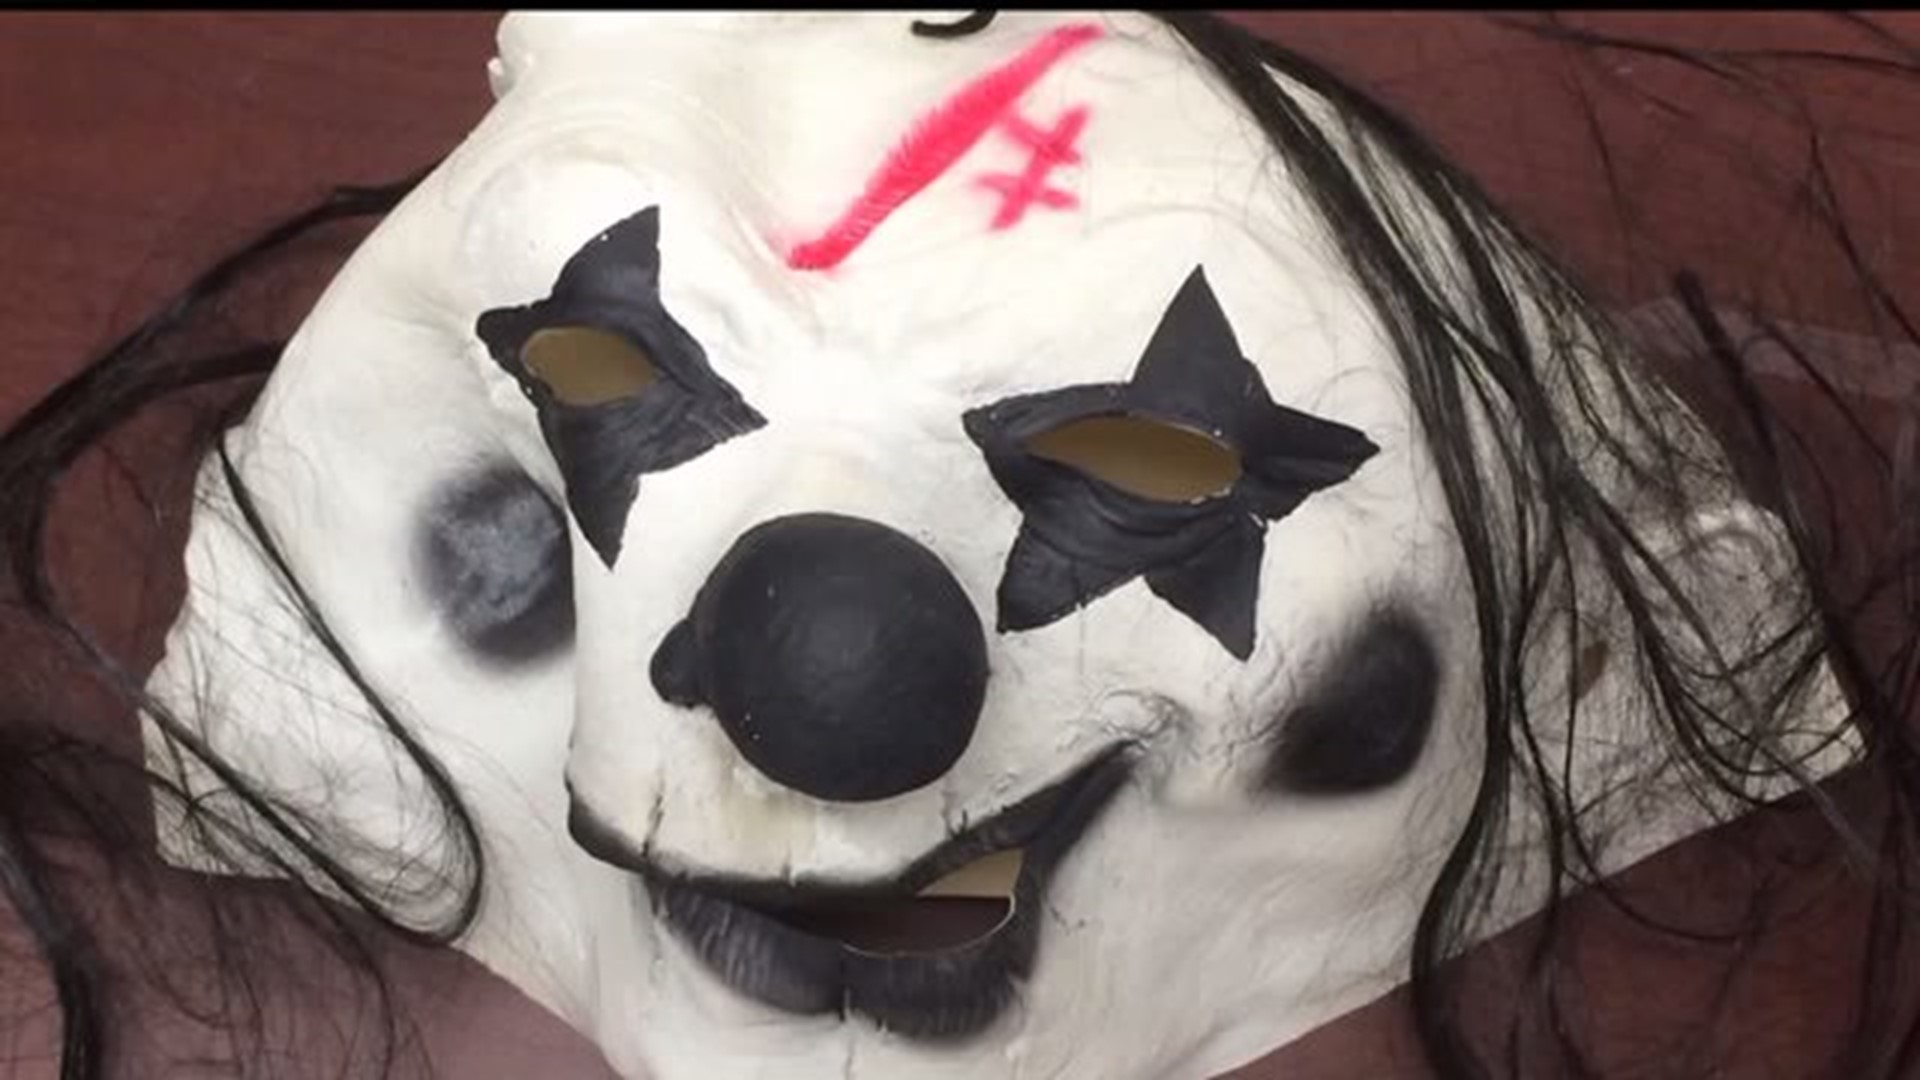 Masked clown faces disorderly conduct charges